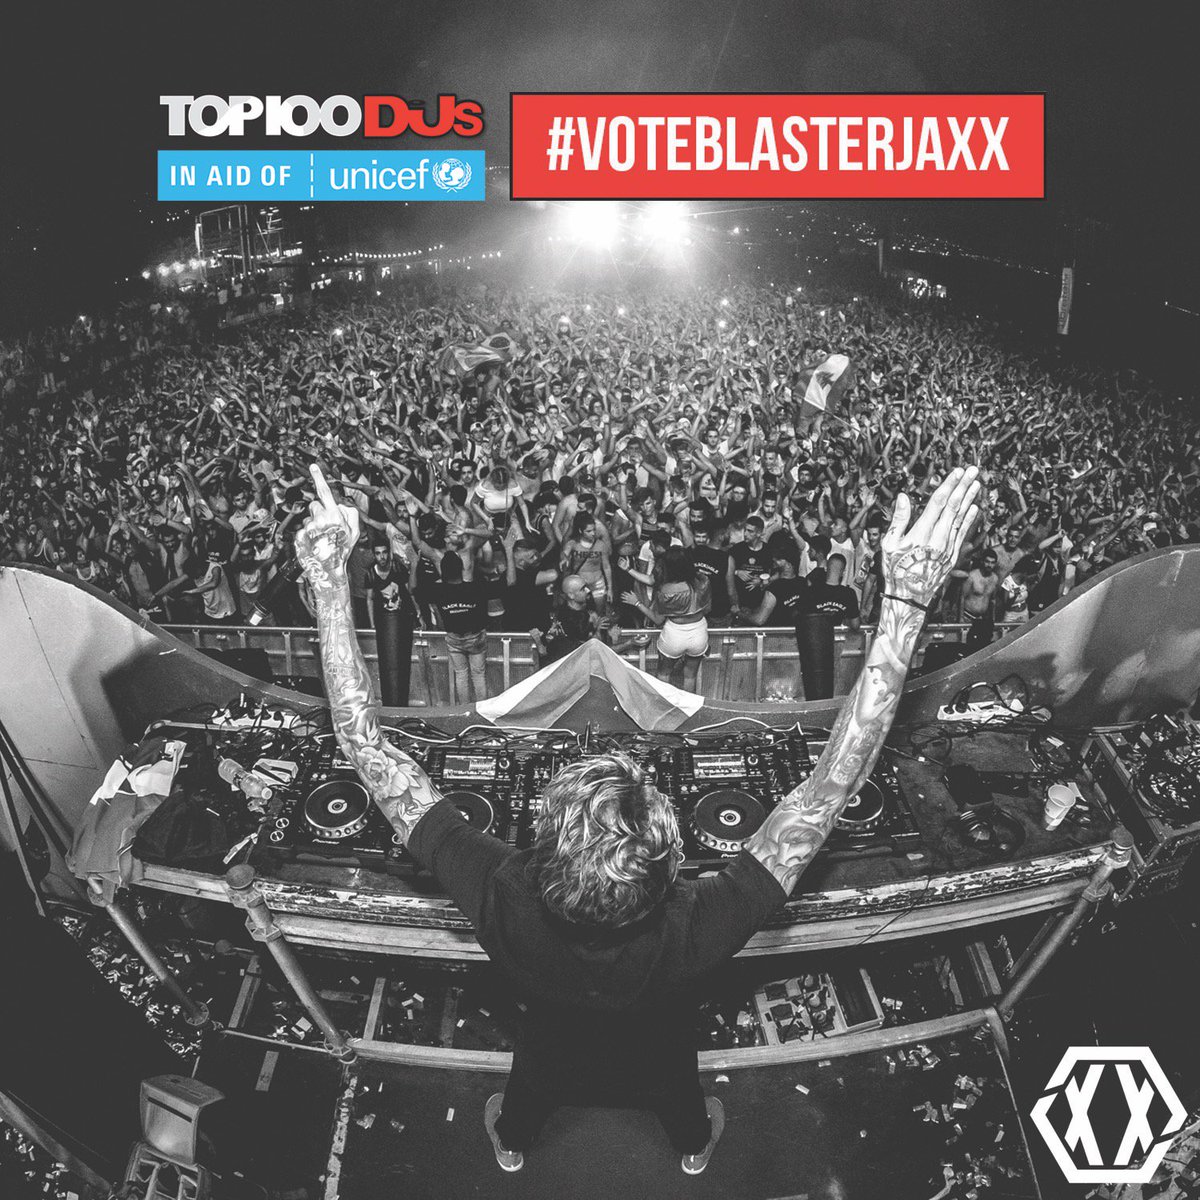 Last chance to submit your vote! Can we count on yours? 😏🙏🏽 top100djs.com https://t.co/srHxiPyjVn